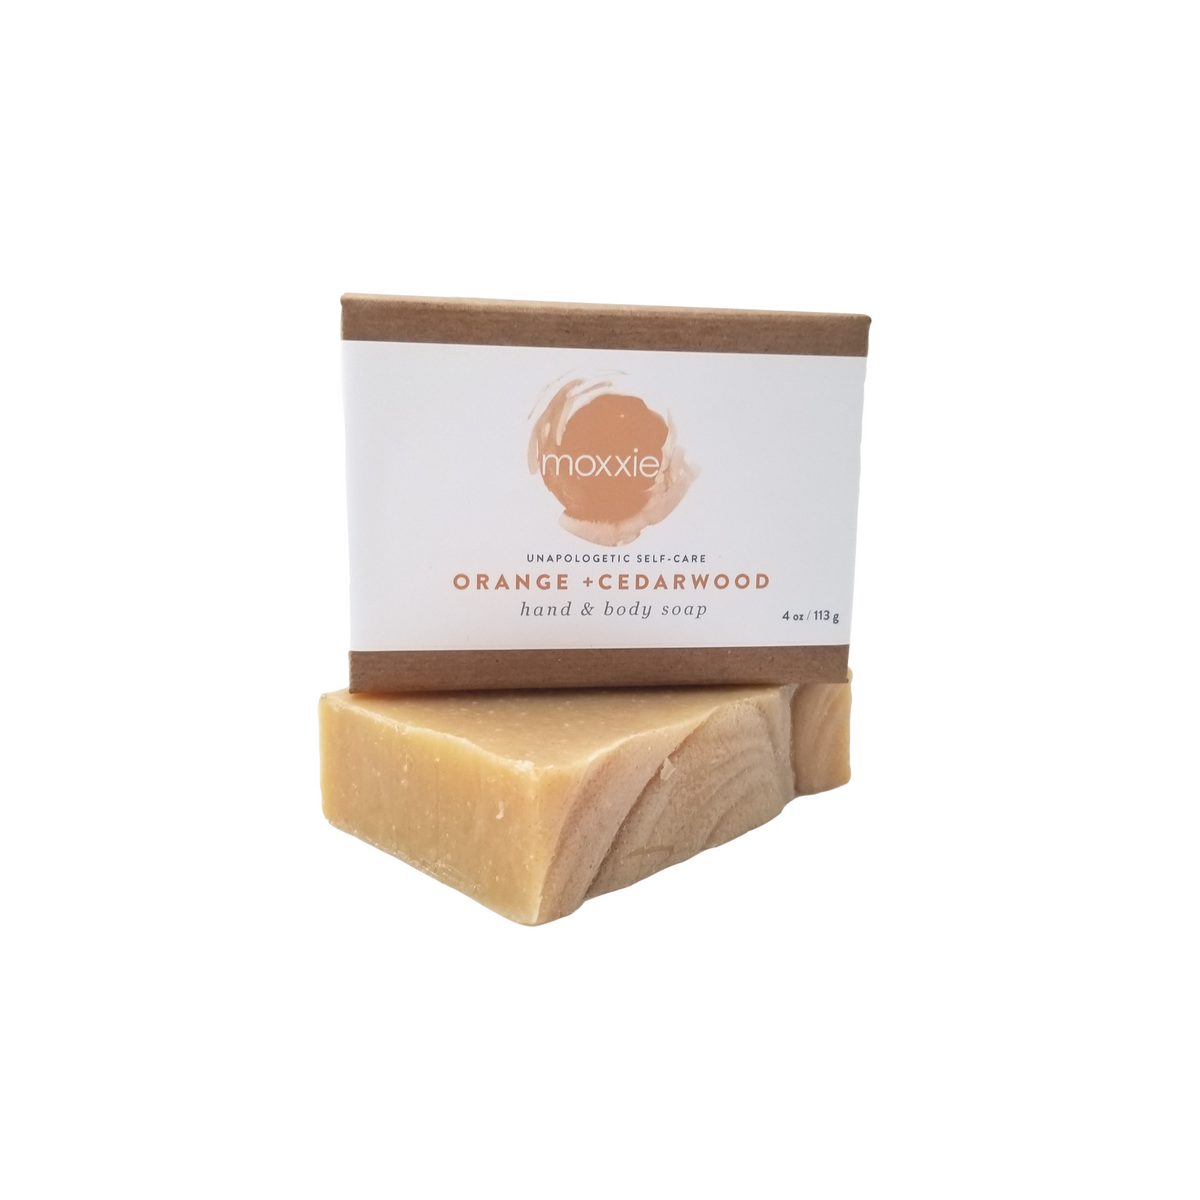 Moxxie handcrafted all natural bar soap in orange and cedarwood